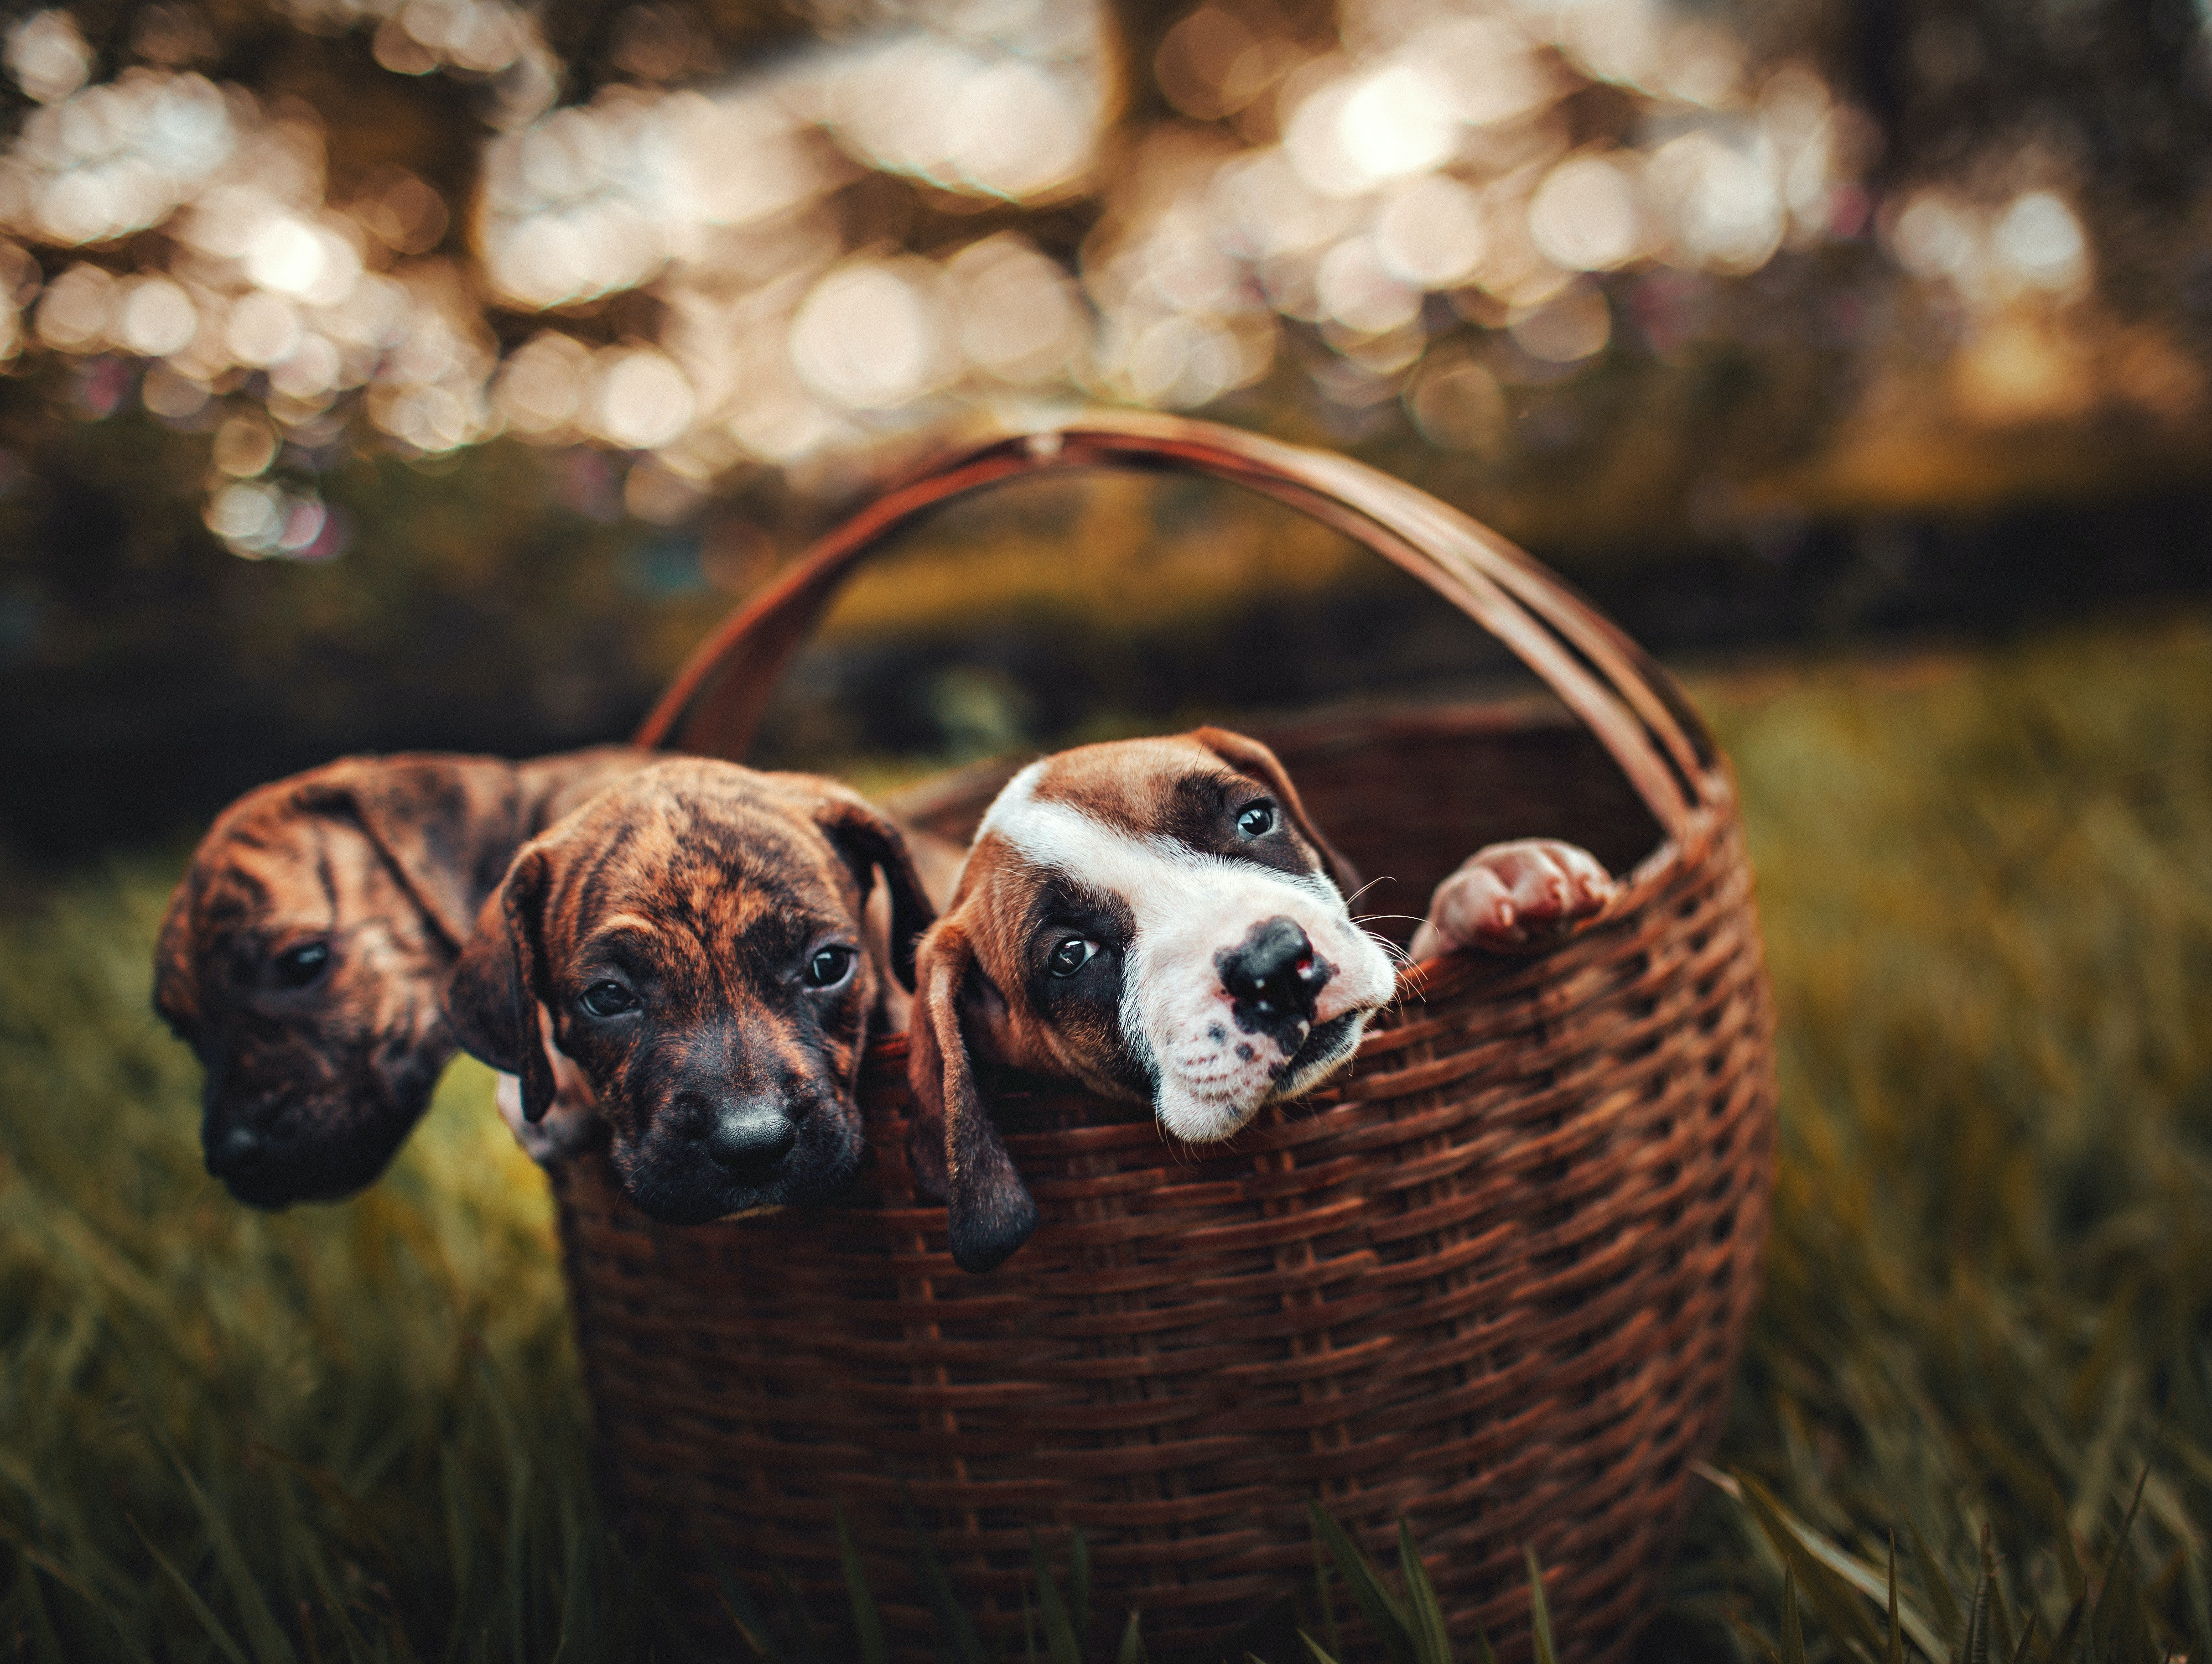 Three puppies peep out from inside a basket | Photo: Pexels/Helena Lopes 